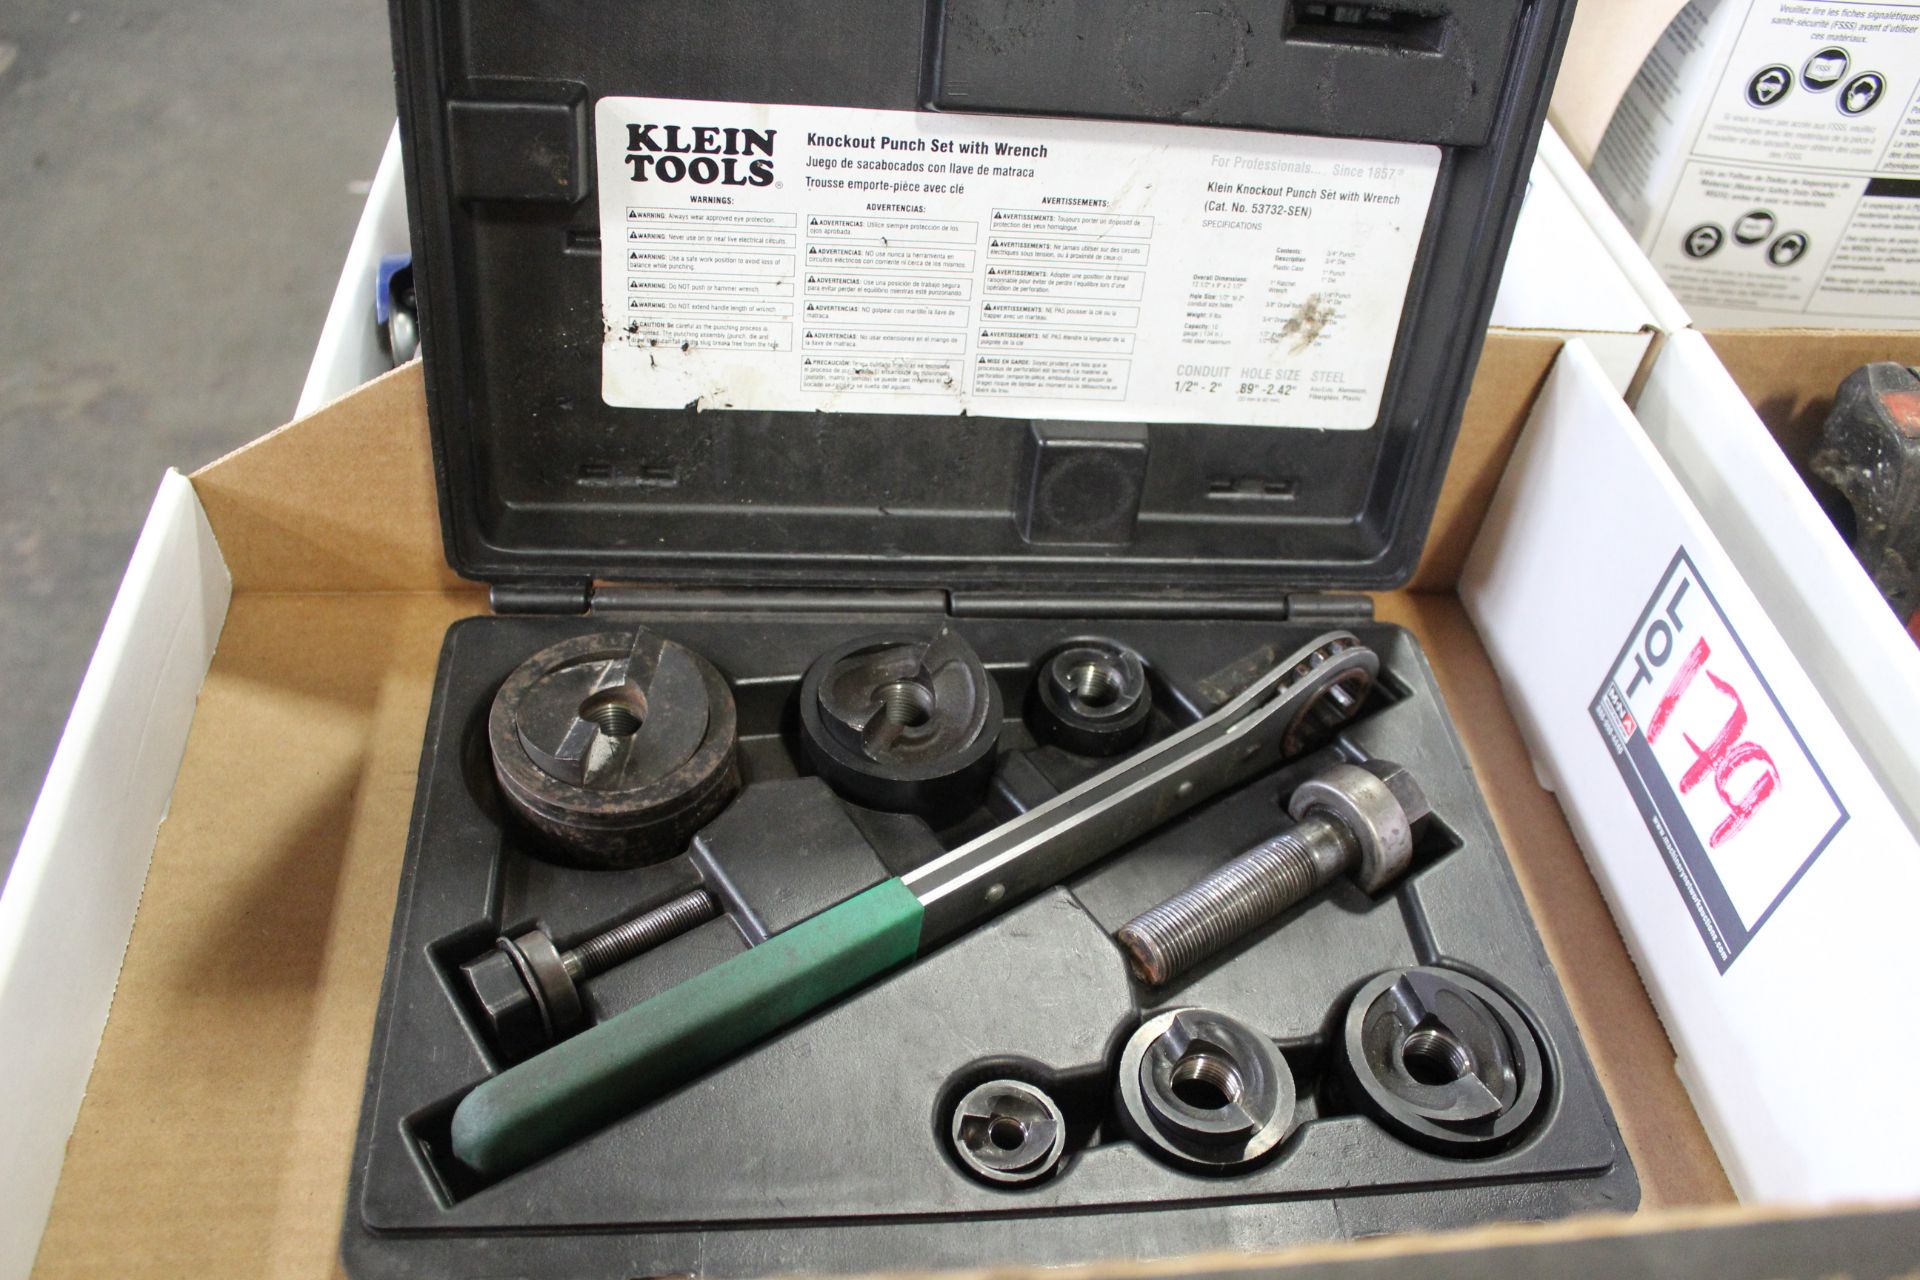 Klien Tools Knockout Punch Set with Wrench - Image 2 of 2